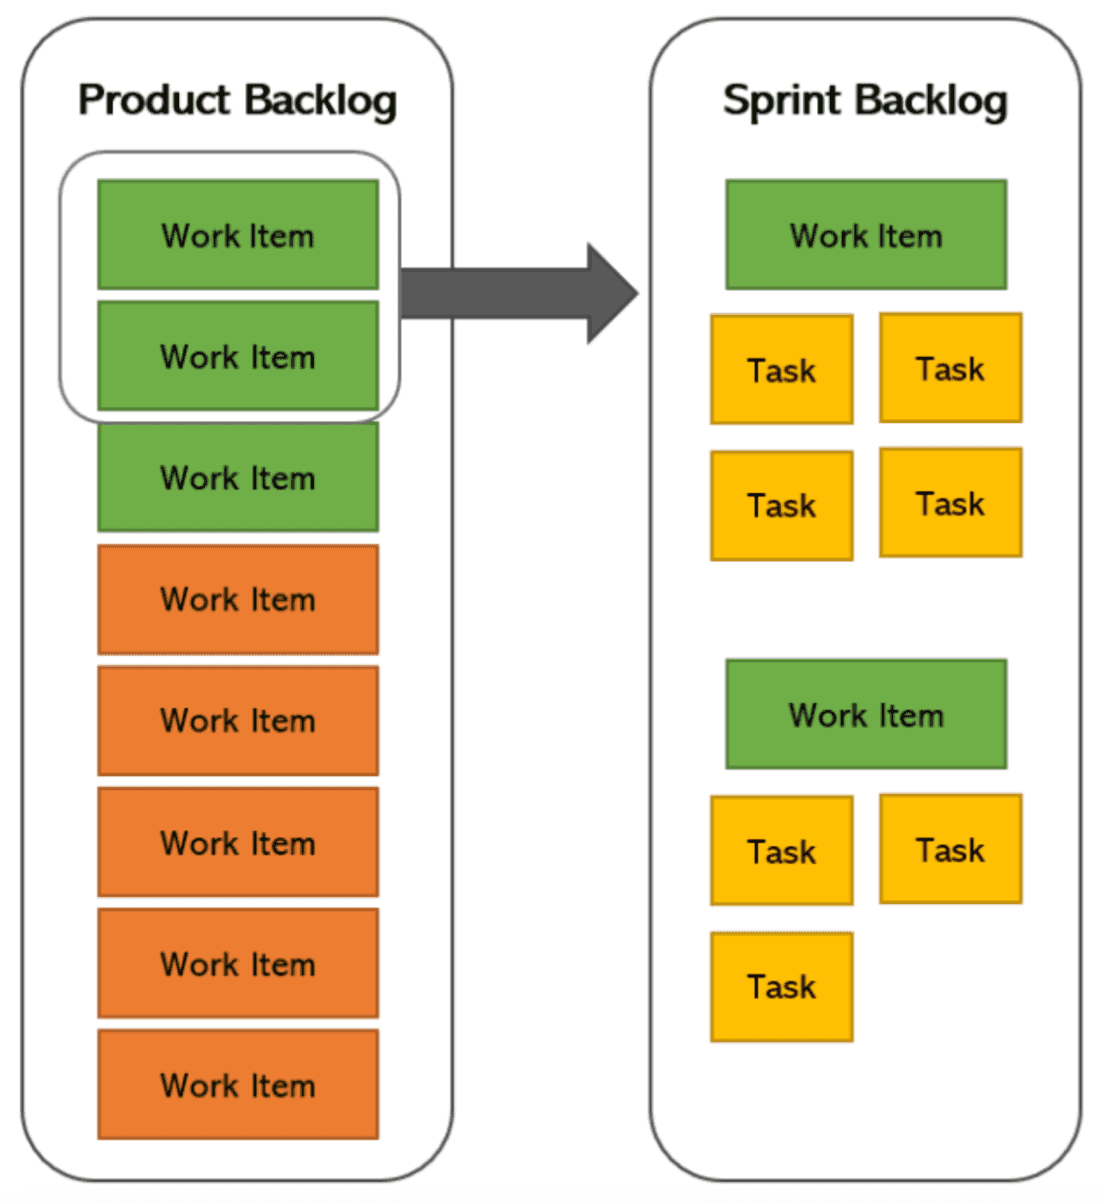 The key differences between product and sprint backlogs, visualized